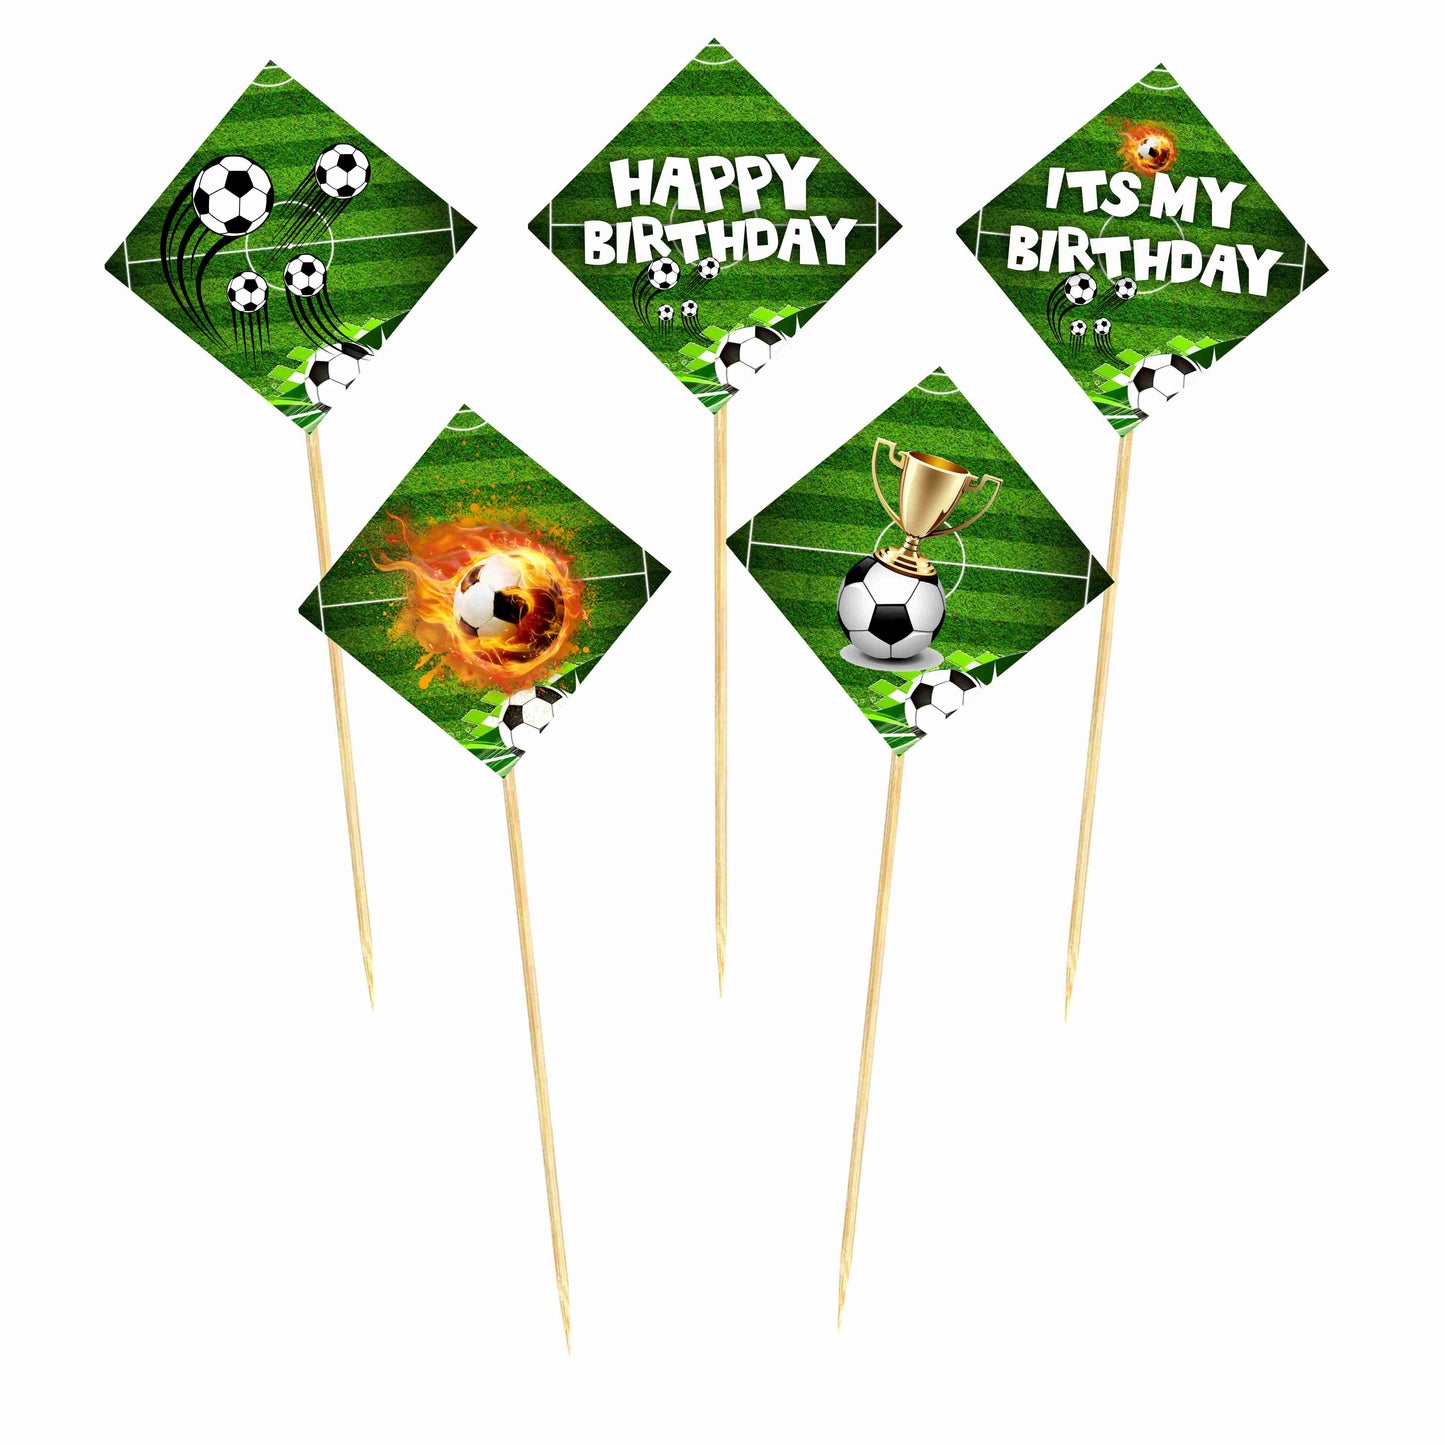 Football Theme Cake Topper Pack of 10 Nos for Birthday Cake Decoration Theme Party Item For Boys Girls Adults Birthday Theme Decor